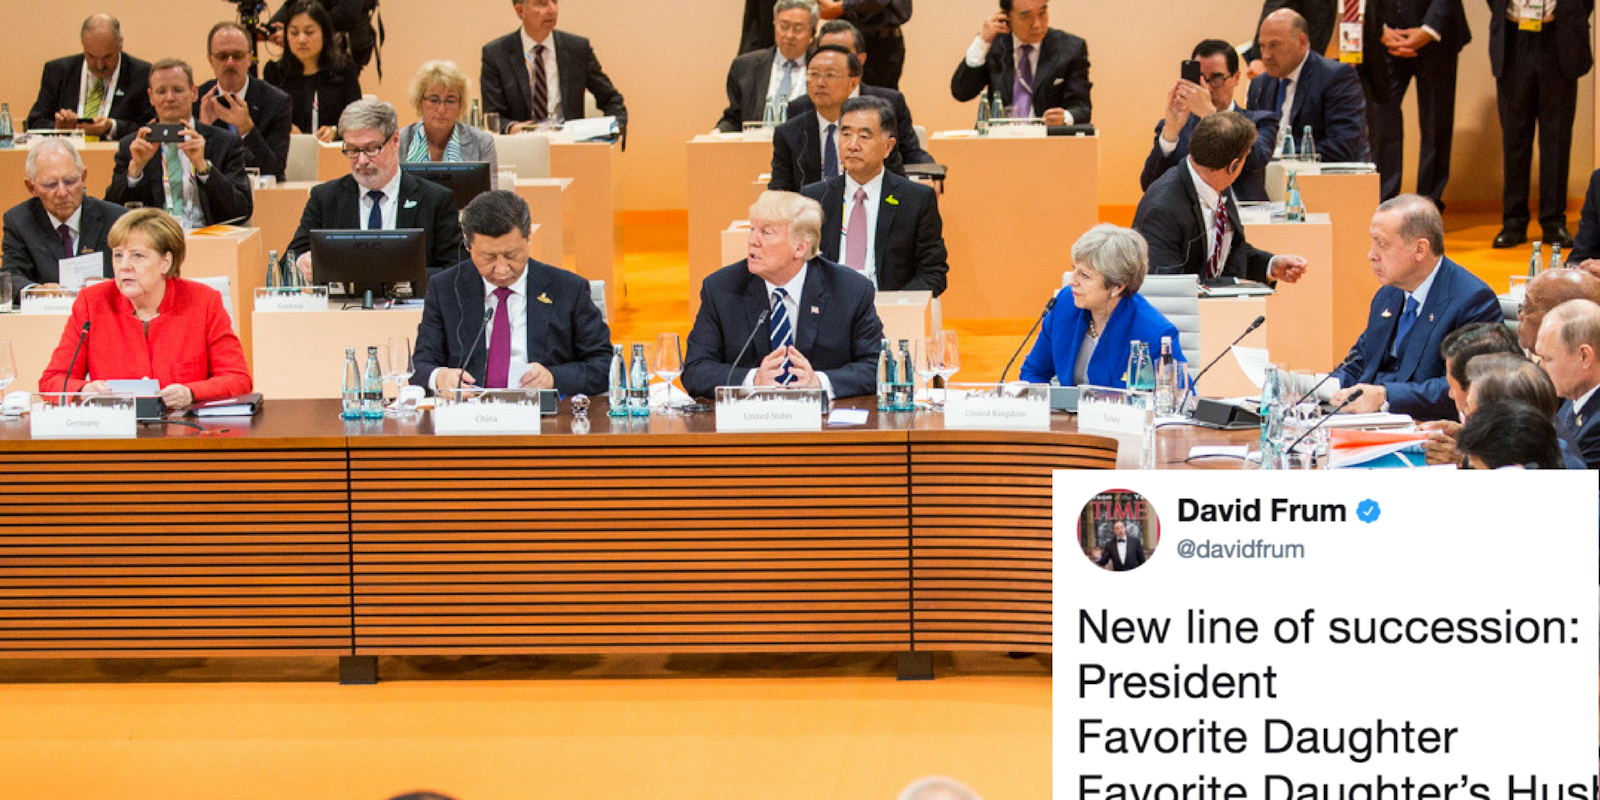 President Donald Trump at the G20 Summit